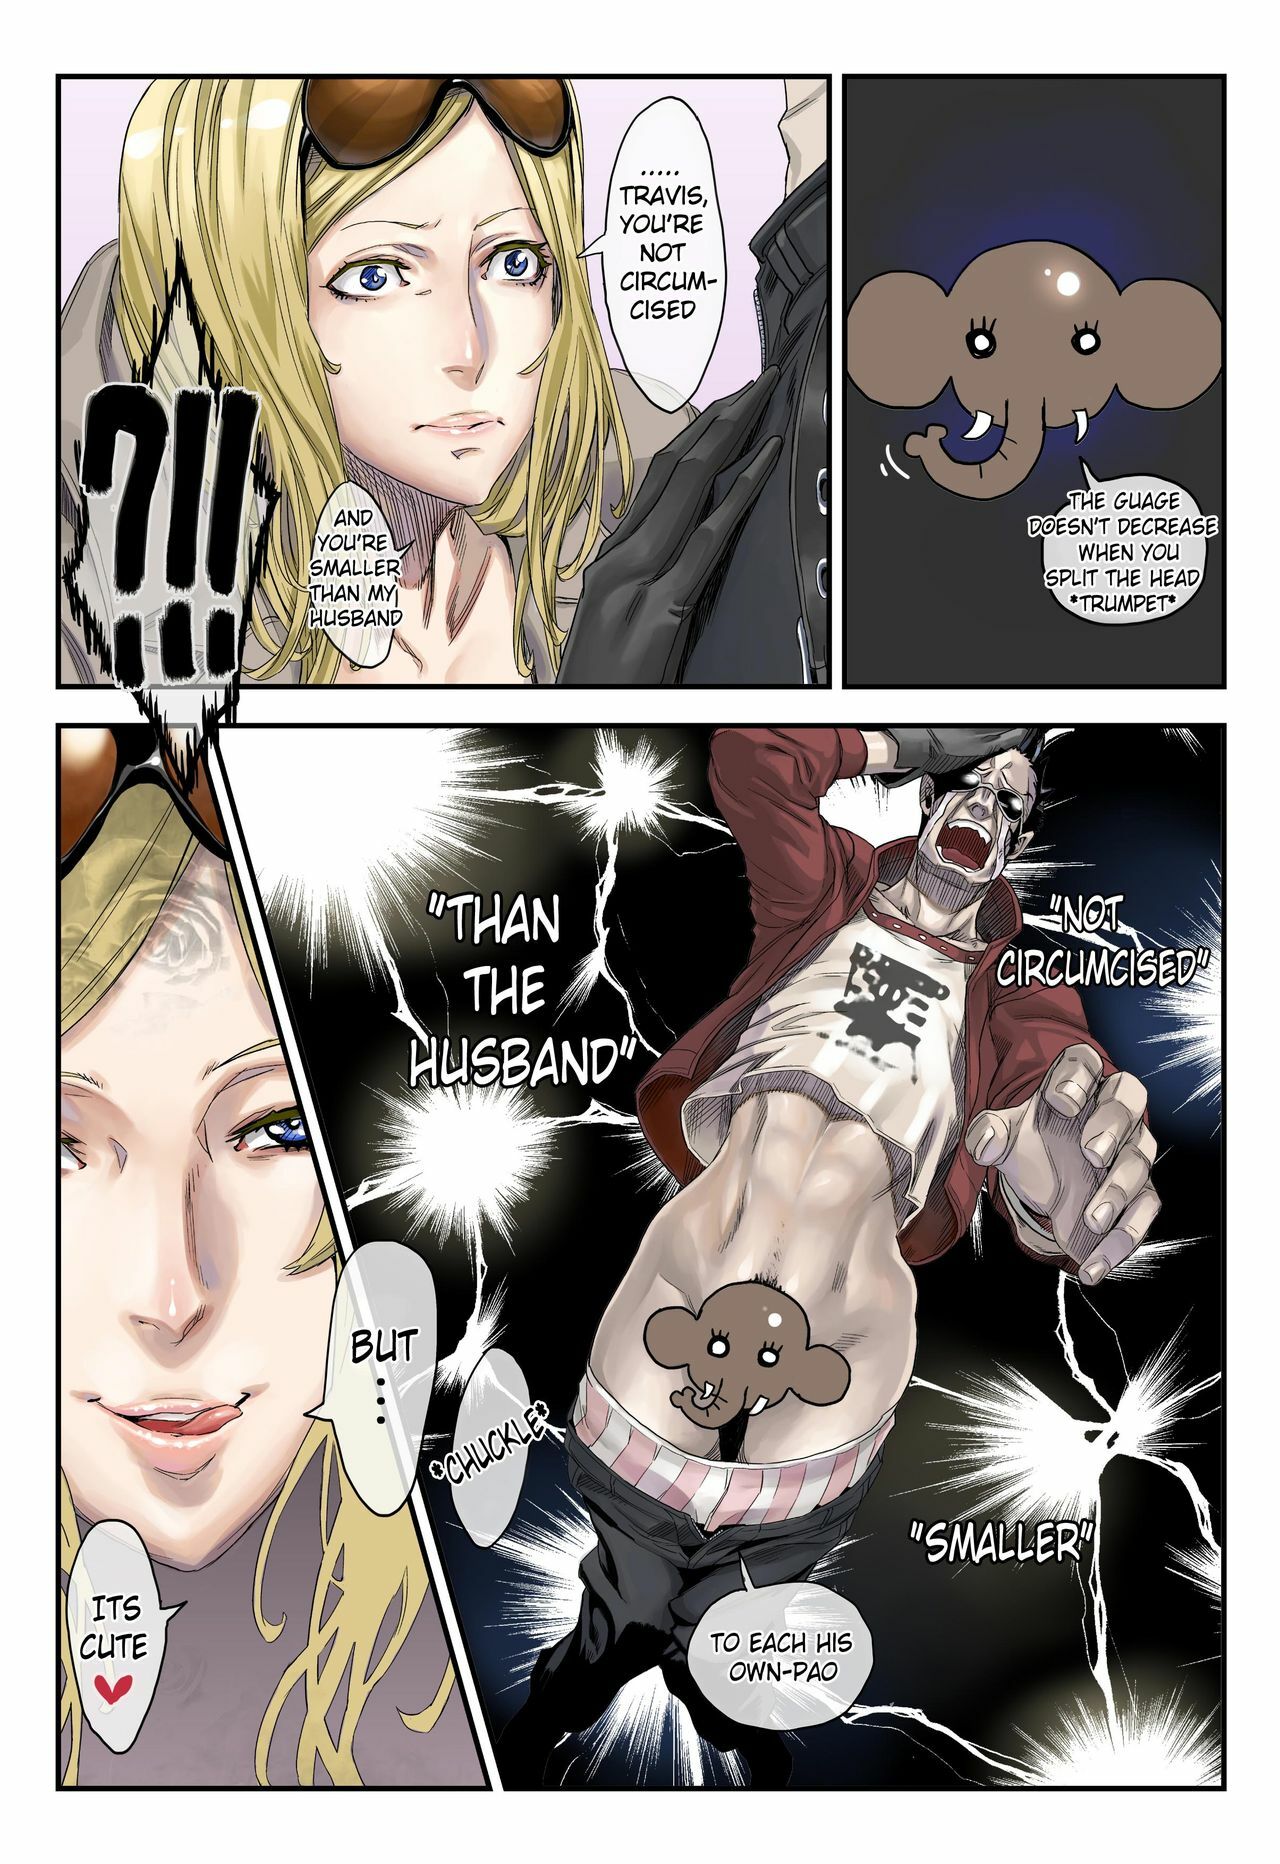 [UNDER CONTROL (zunta)] One More Heroes (NO MORE HEROES) [English] [Doujin-Moe.us] [Digital] page 6 full